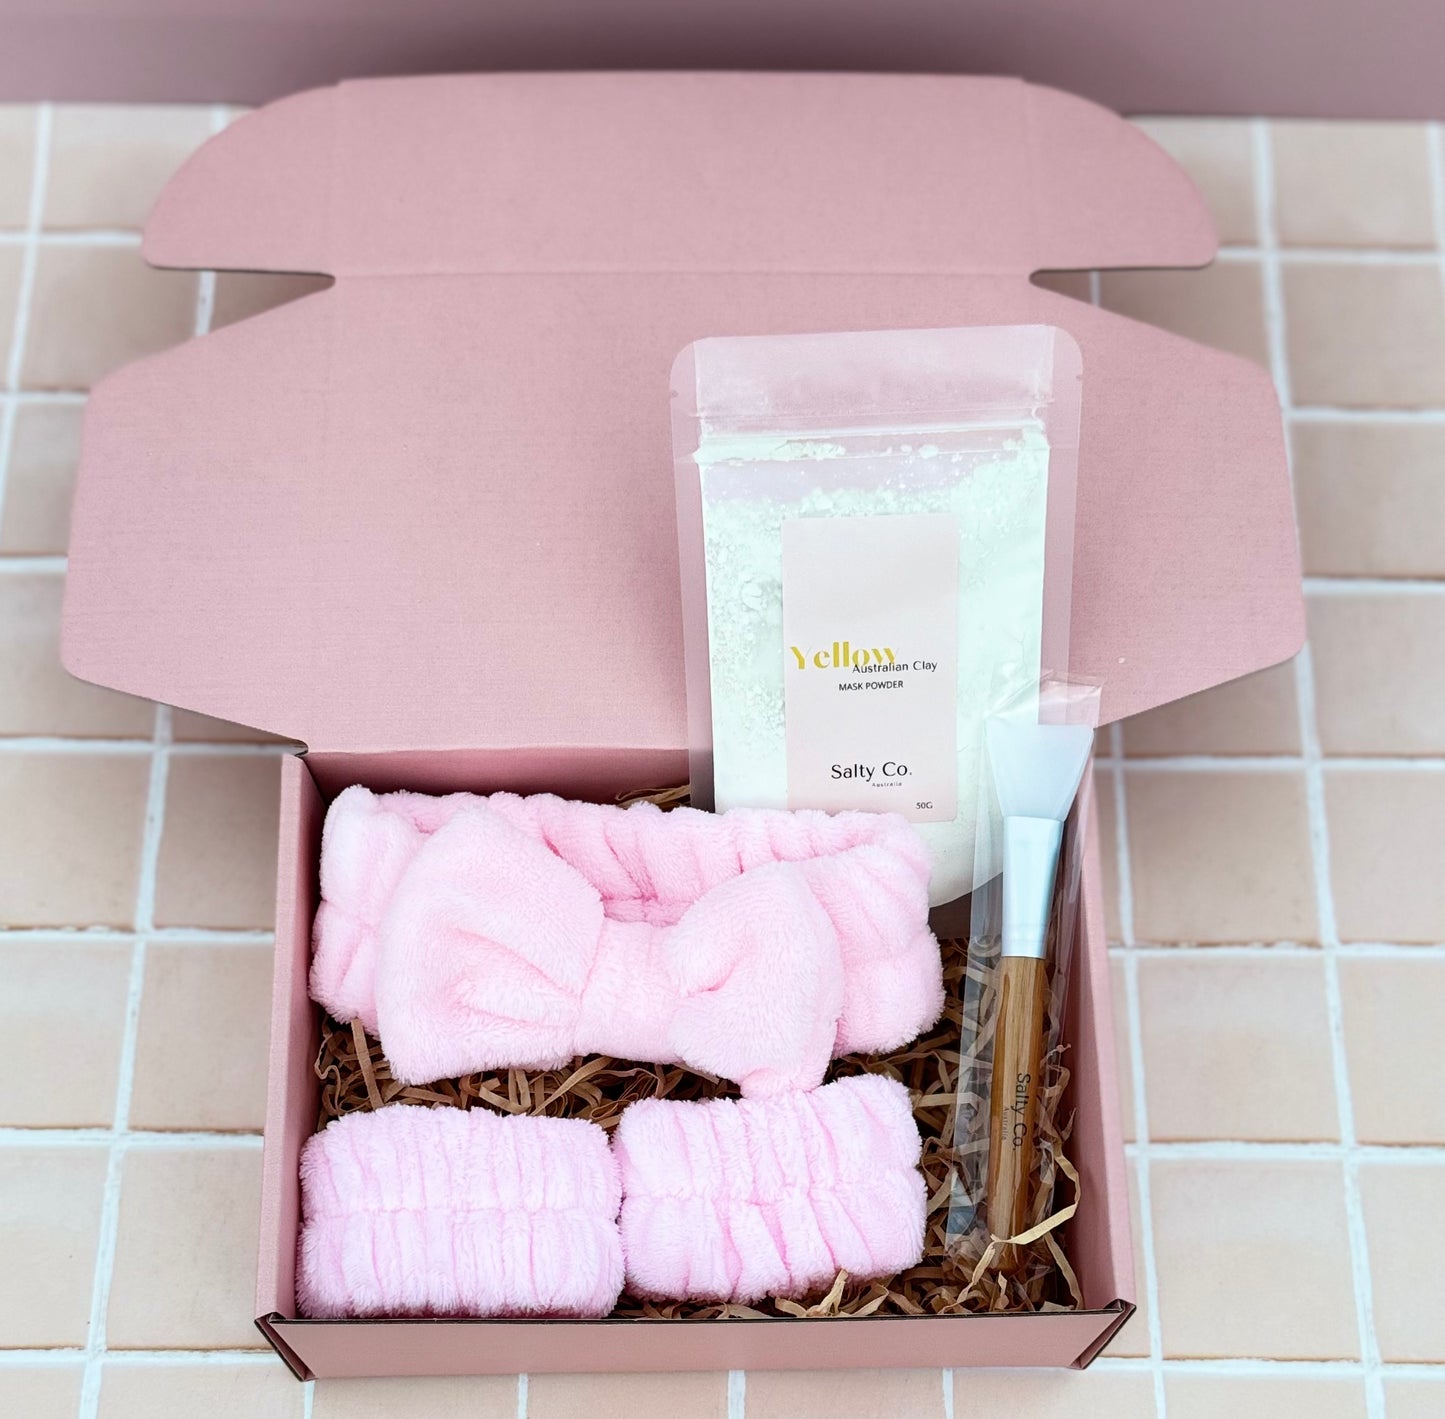 The Day Spa Bundle